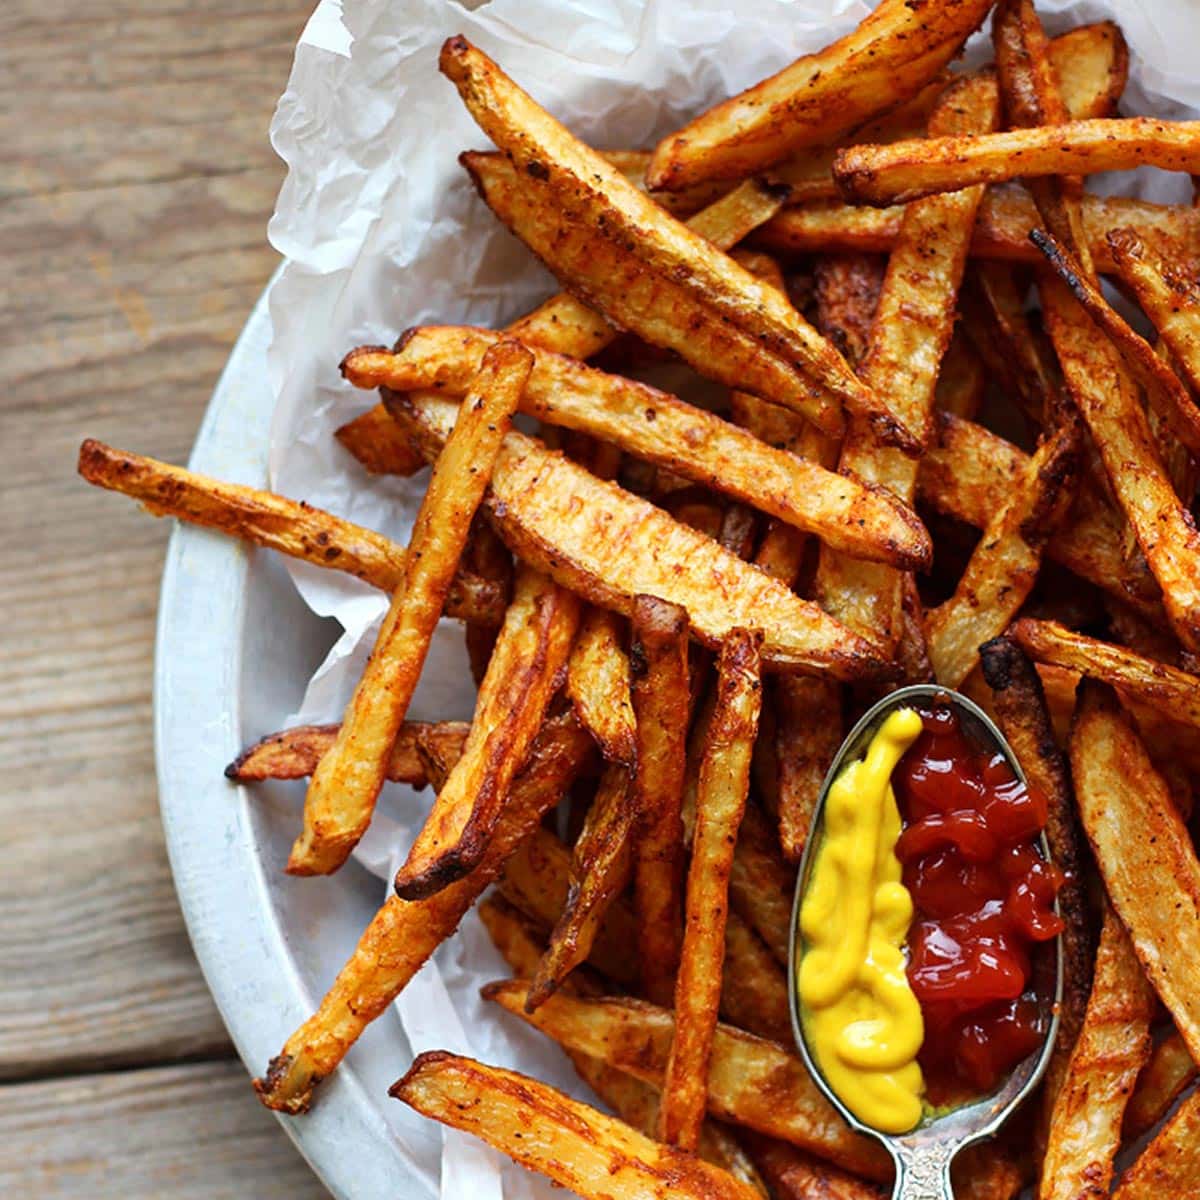 https://www.fivehearthome.com/wp-content/uploads/2023/02/Baked-Seasoned-Fries-Recipe-Spicy-Fries-by-Five-Heart-Home_1200pxFeatured50.jpg